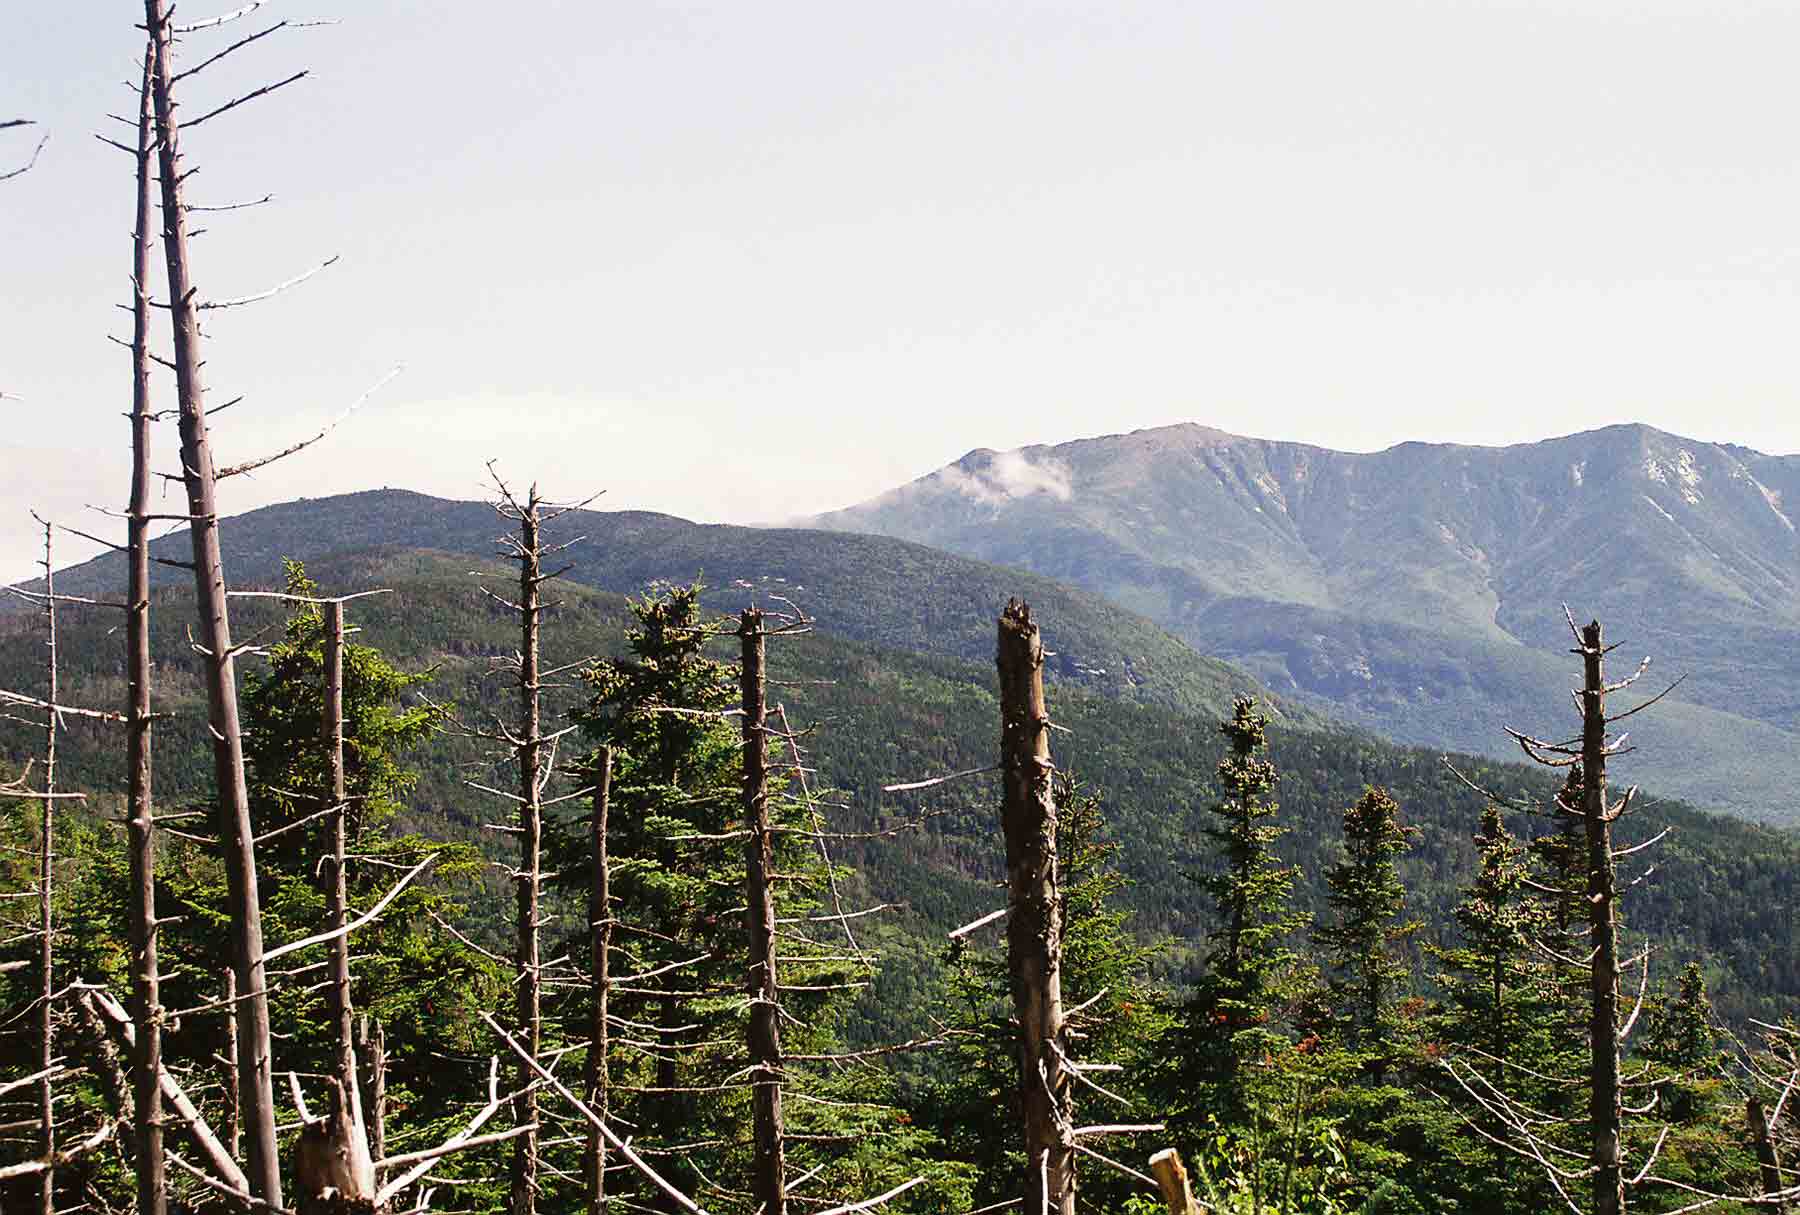 Franconia Ridge and Cannon Mt. from Fishing Jimmy Trail (part of AT) Large peak on left is Mt. Lafayette. Cannon Mt. is the nearer peak on left side of picture. Courtesy dlcul@conncoll.edu